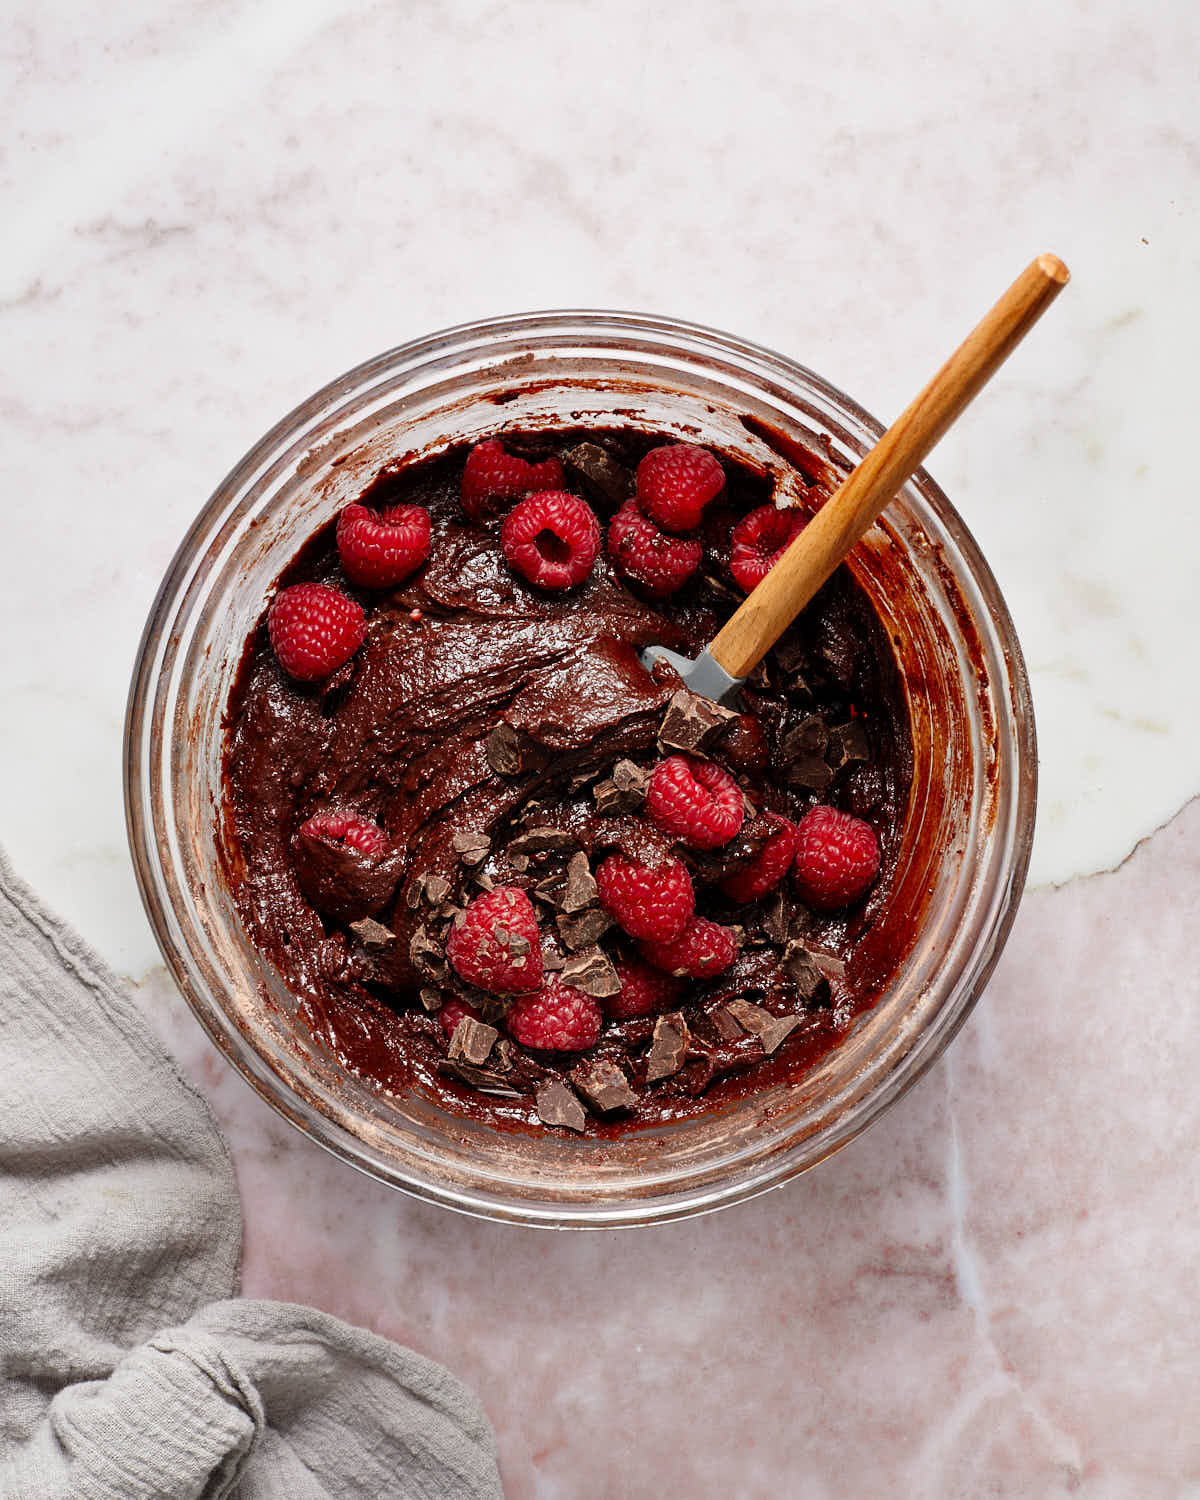 Brownie batter in a glass bowl with raspberries and chopped chocolate stirred in.